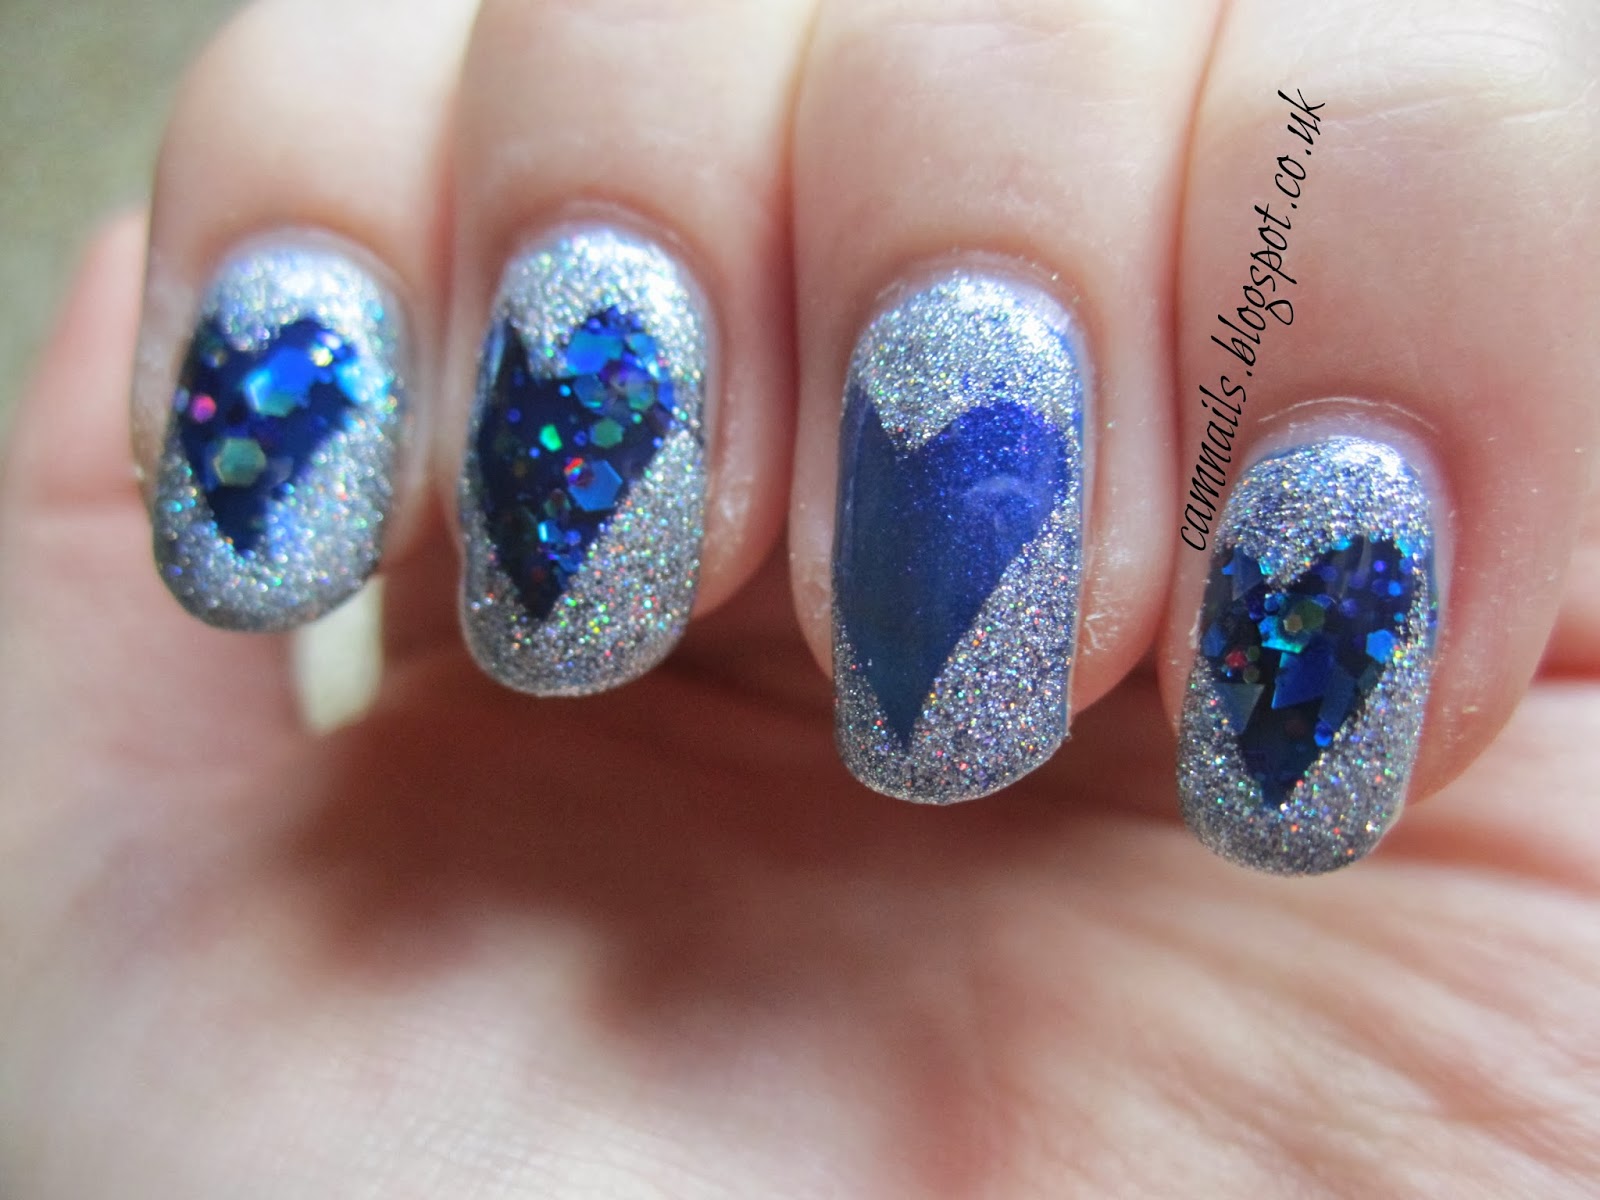 Blue Heart Nail Art Designs for Short Nails - wide 3